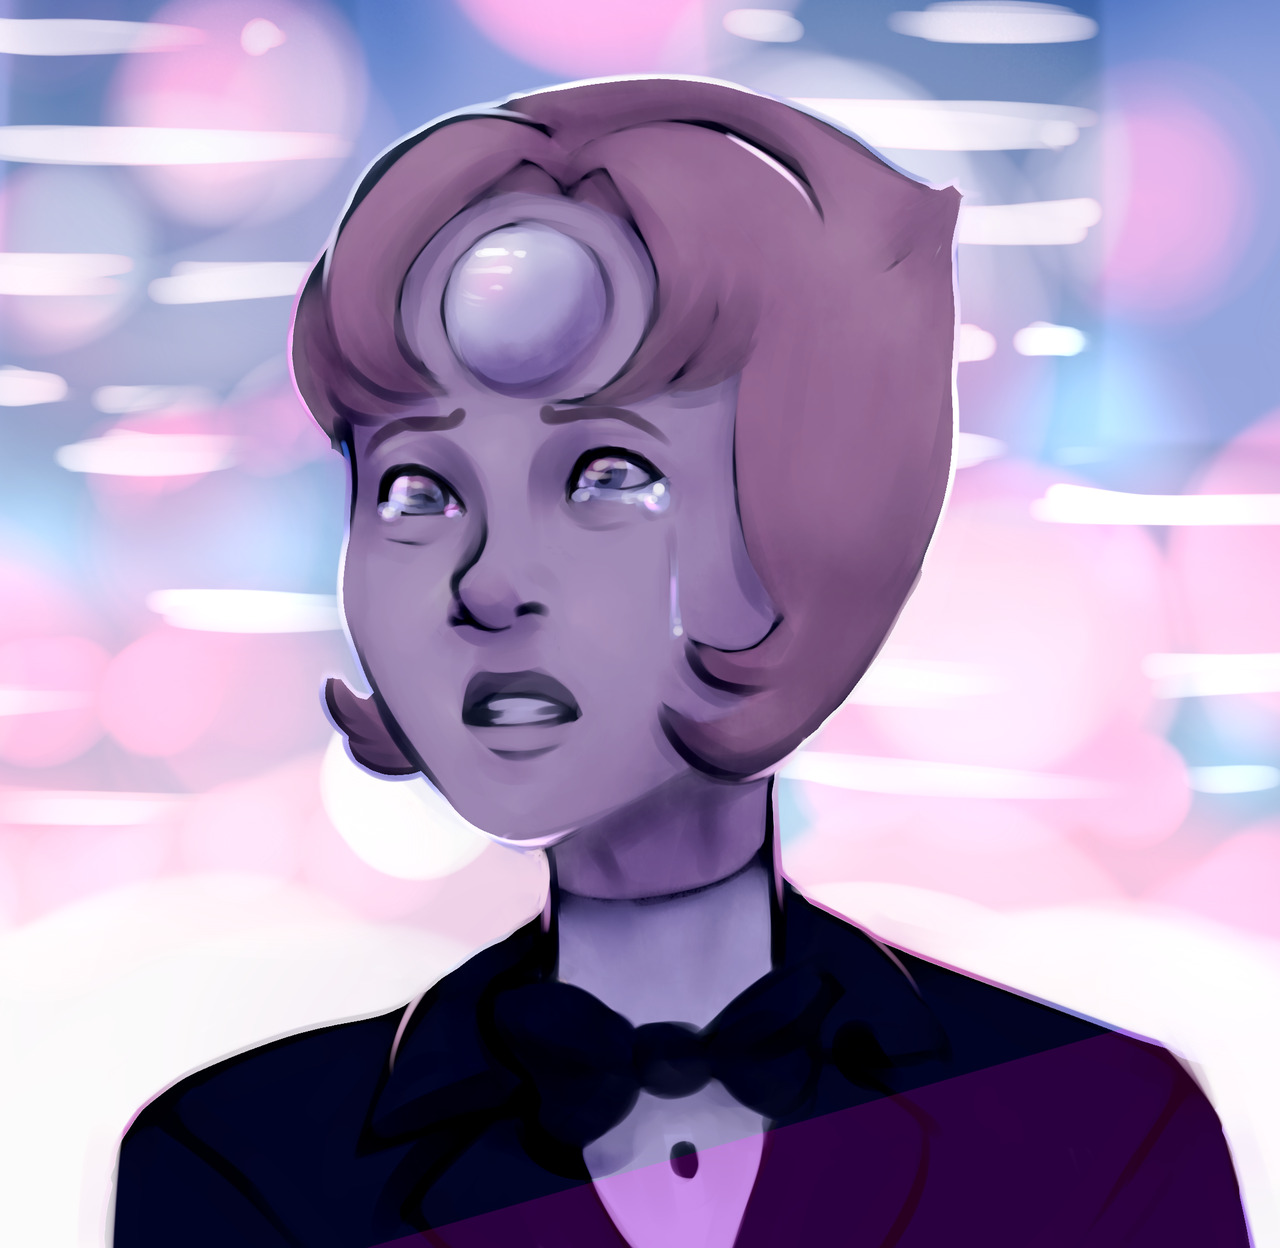 Moving On A strange reamerging interest in the iconic “It’s Over Isn’t It” broke through some art block! I based Pearl’s face off of Deedee’s